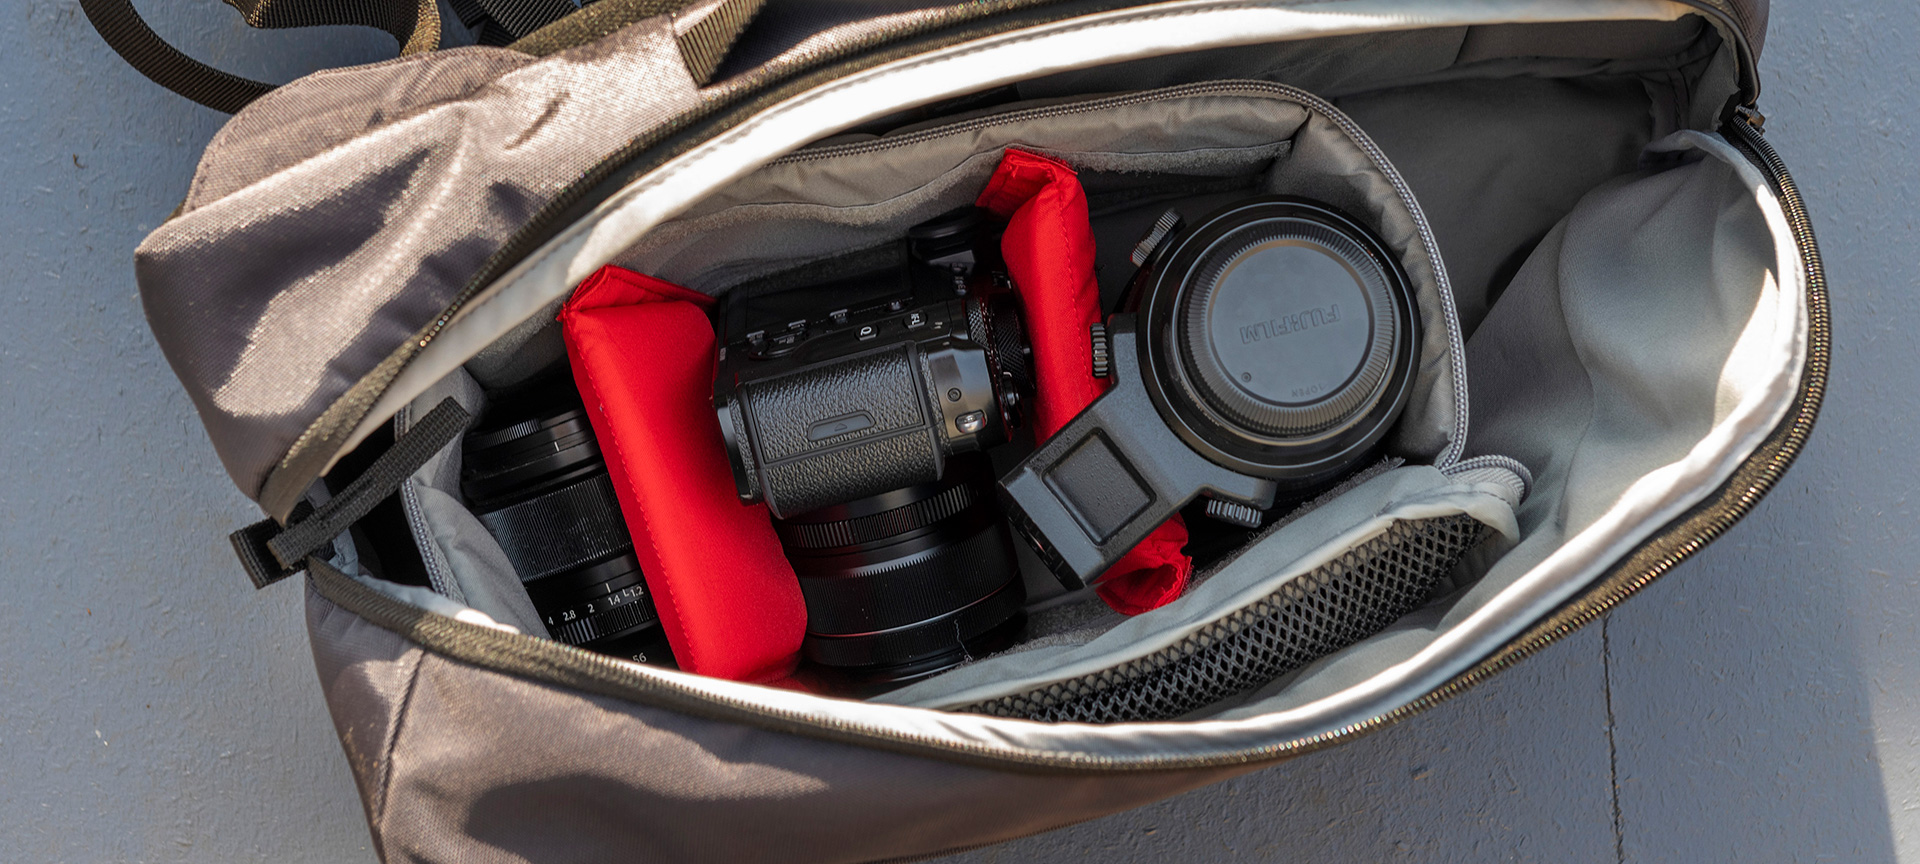 manfrotto nx sling bag